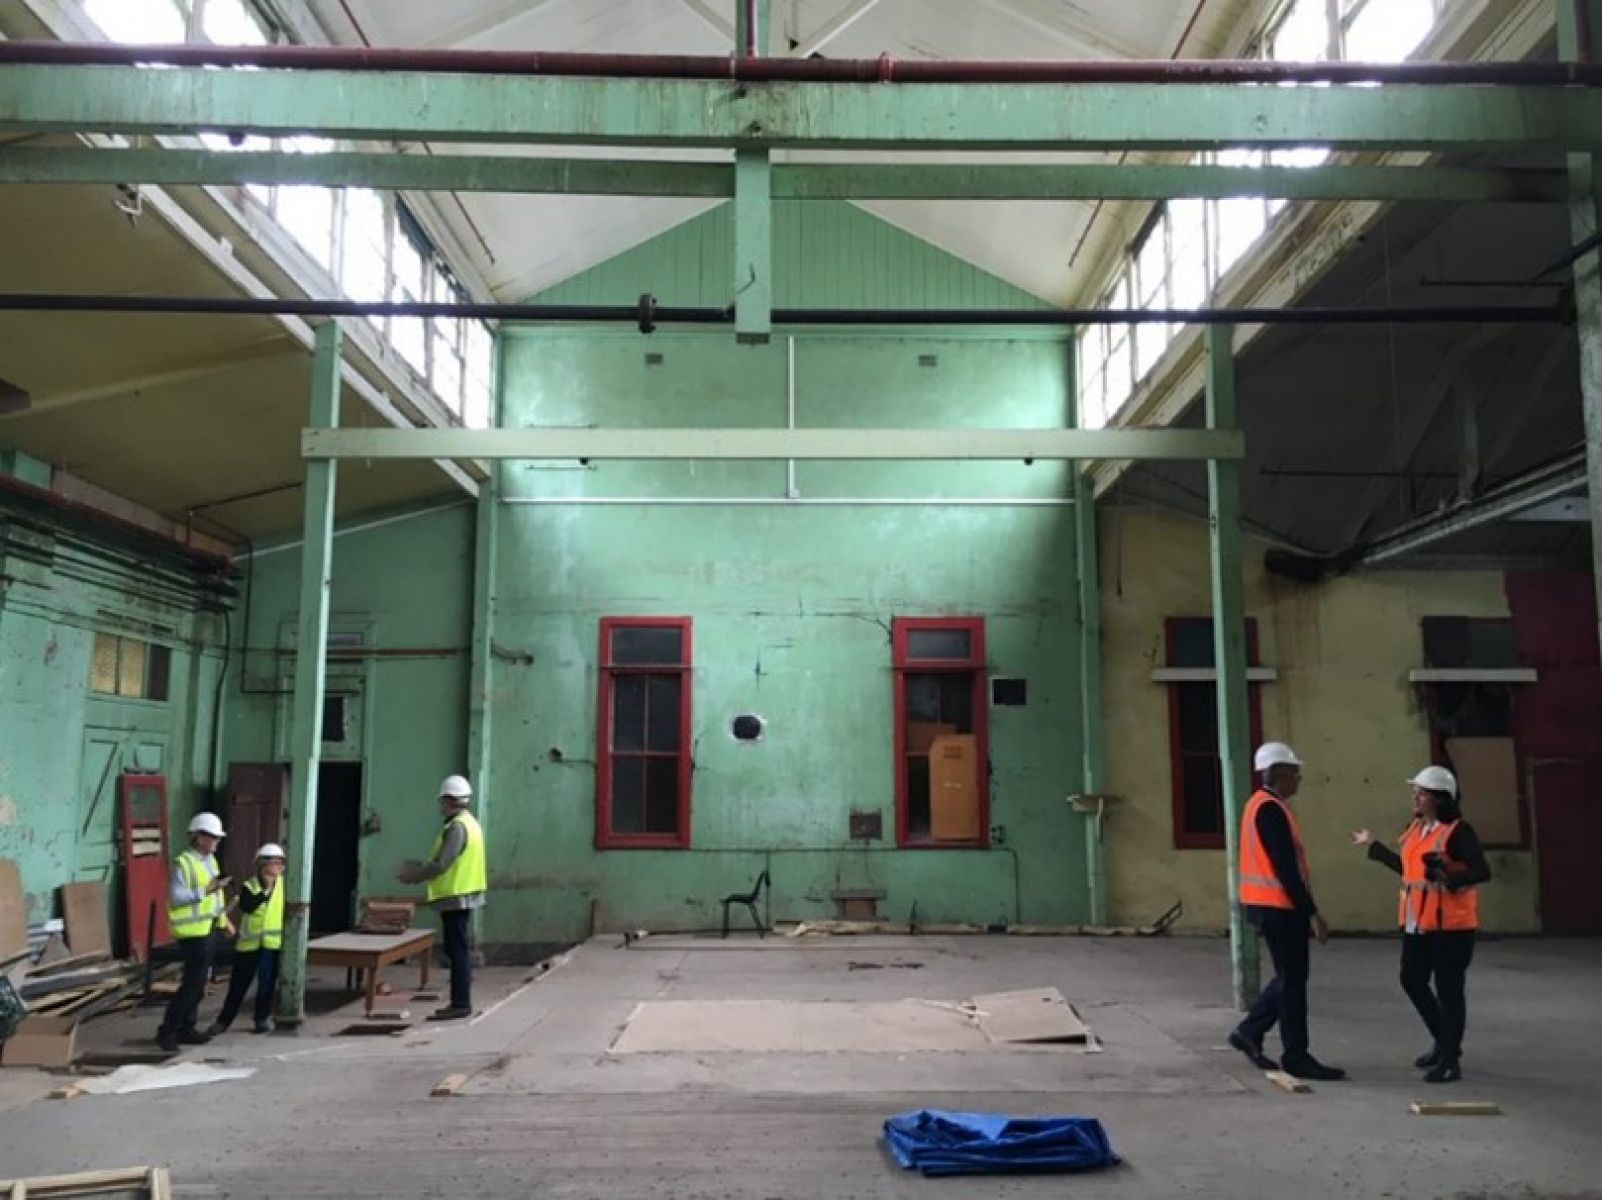 Interior of the Magdalen laundries with workers doing construction of the walls.